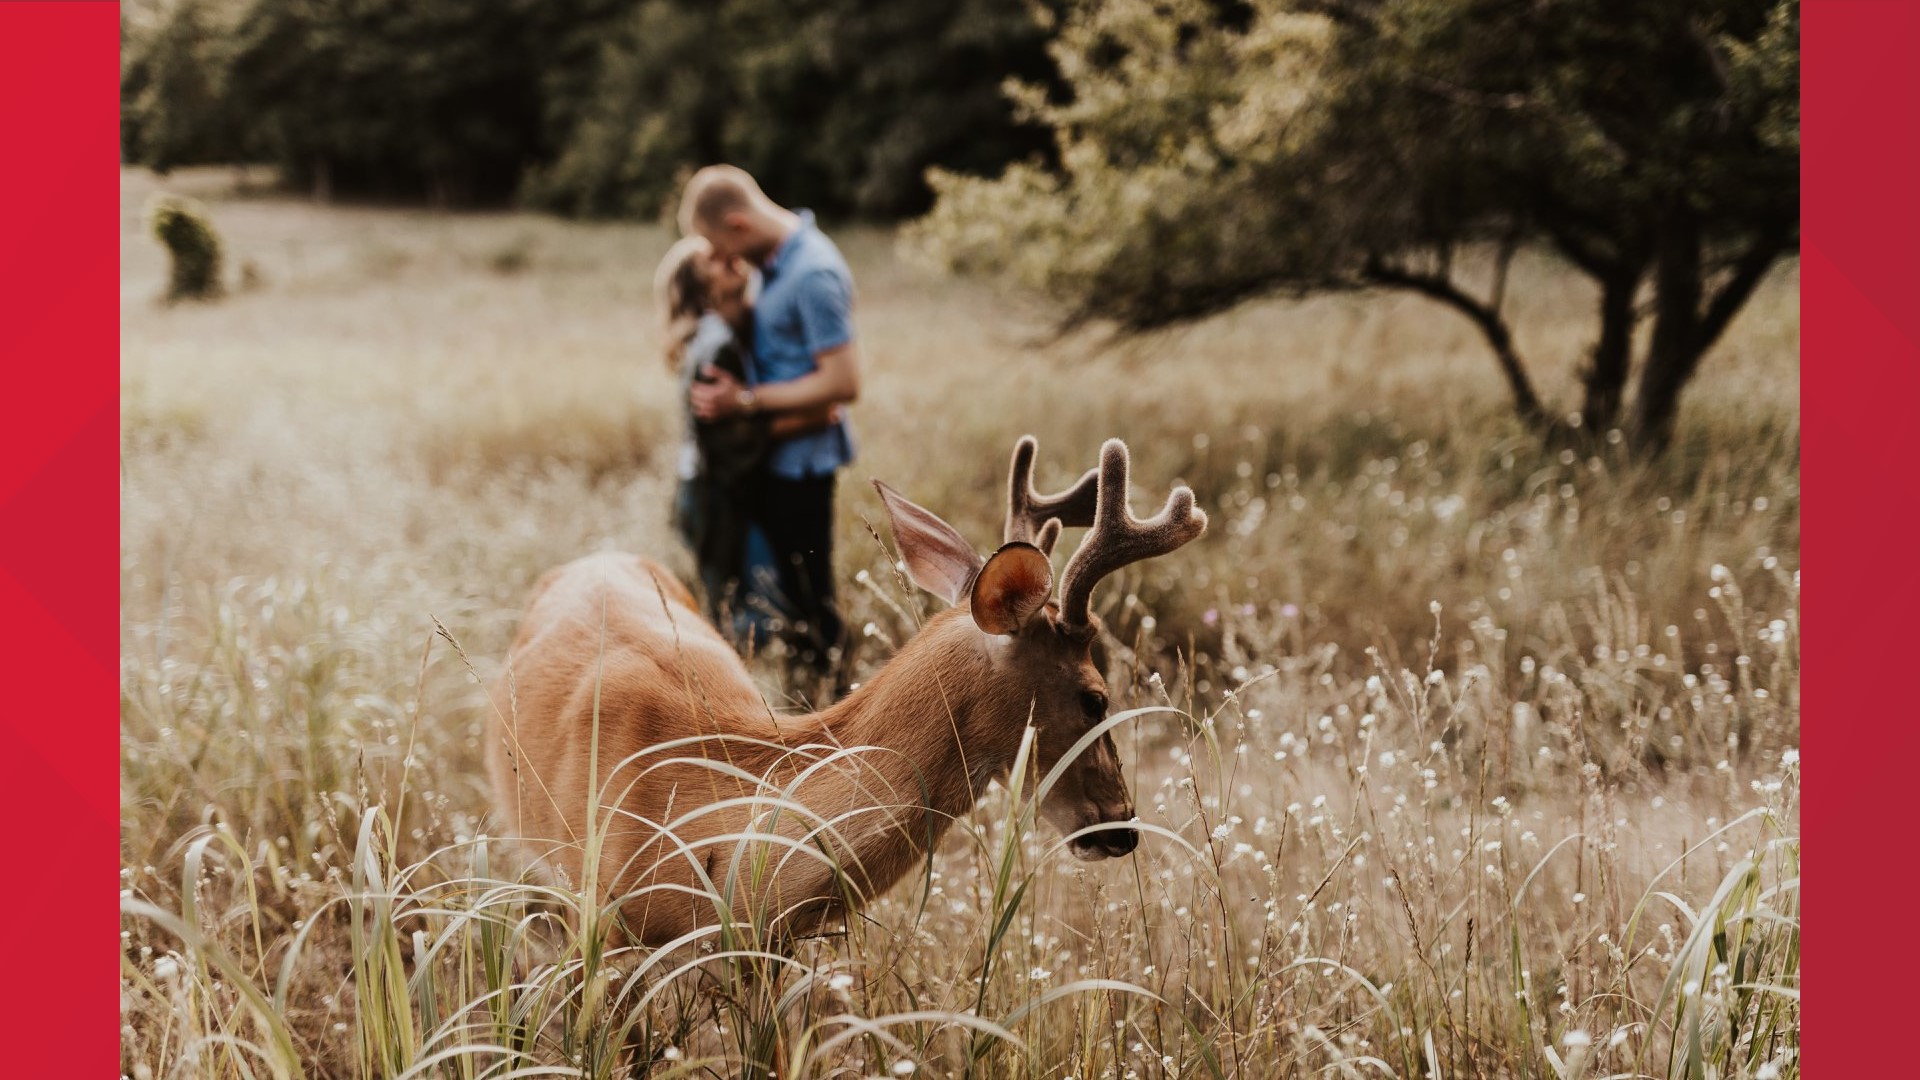 We call it photobombing, they call it home! Photographer Eldina Kovacevic, owner of Inna Kova Photography, was conducting an engagement shoot for a couple when a deer did a deer thing--crept into photo session.